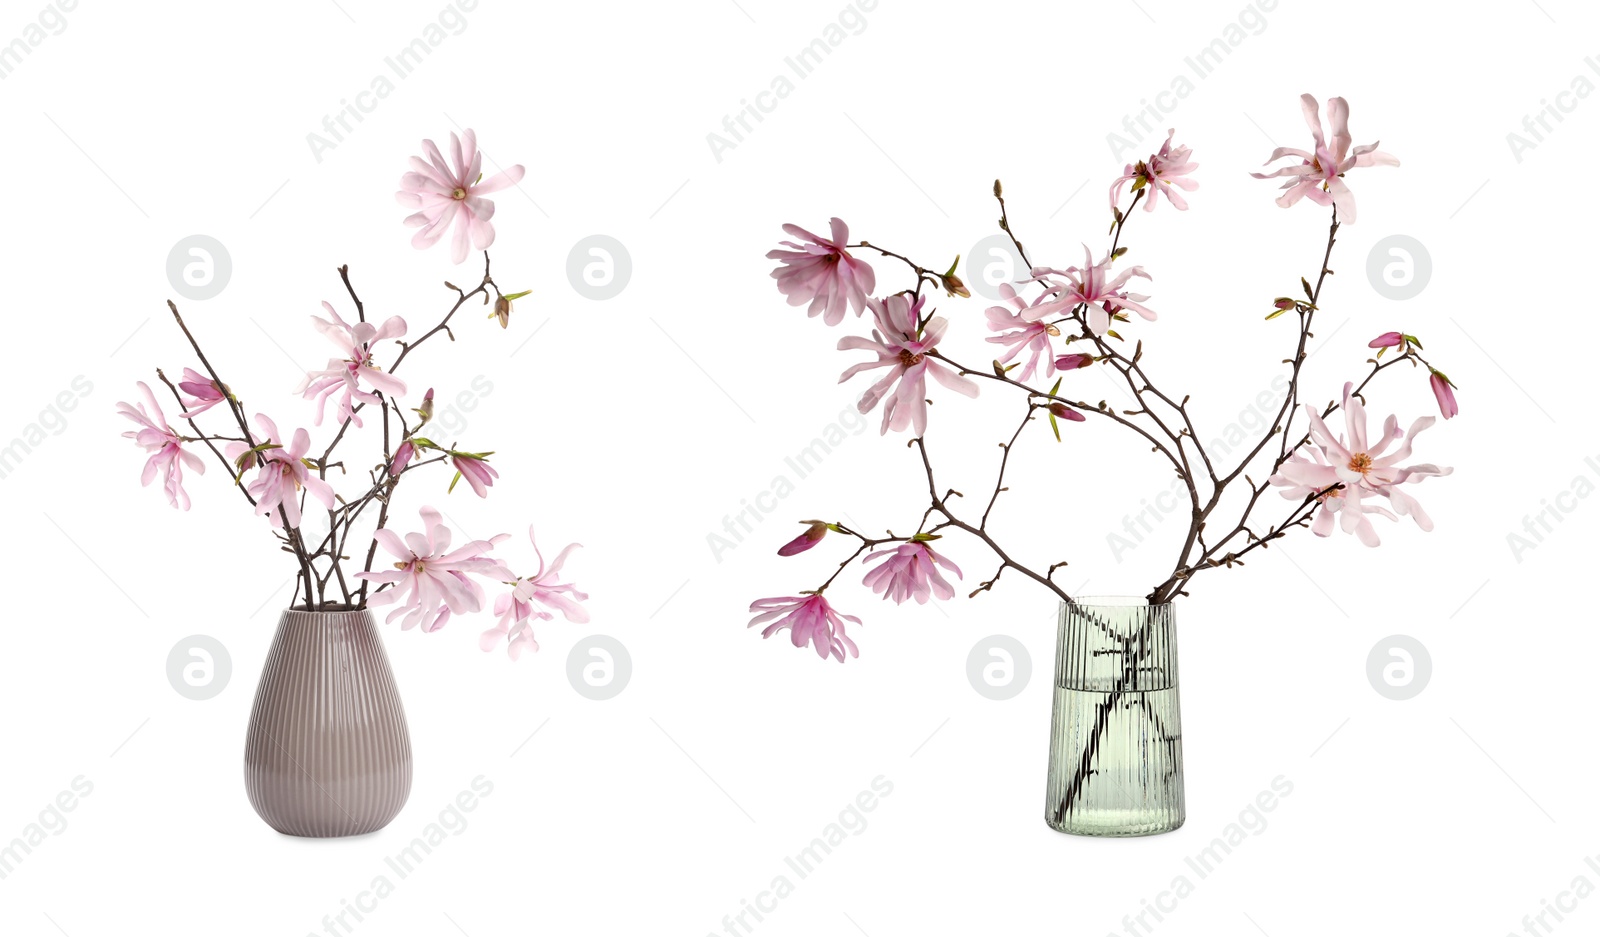 Image of Magnolia tree branches with beautiful flowers in vases on white background